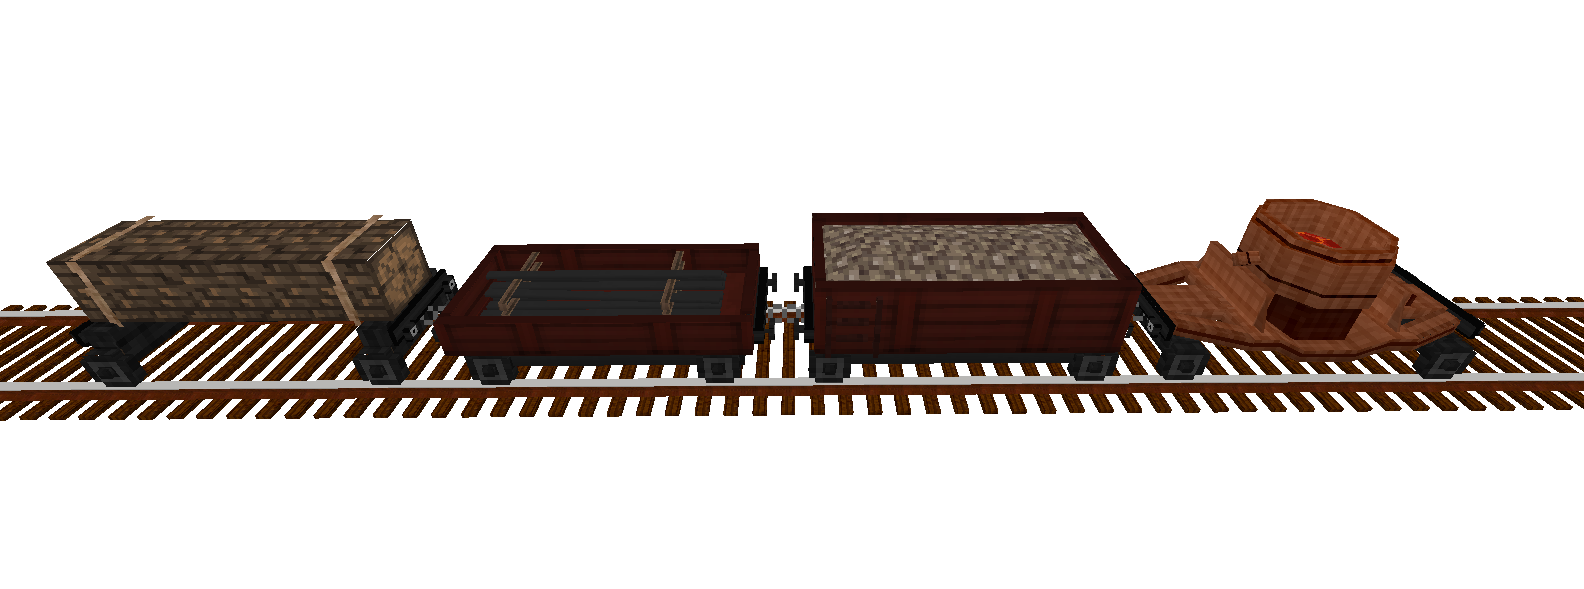 Side view of rake of freight train wagons: tree, track, gravel and lava wagons